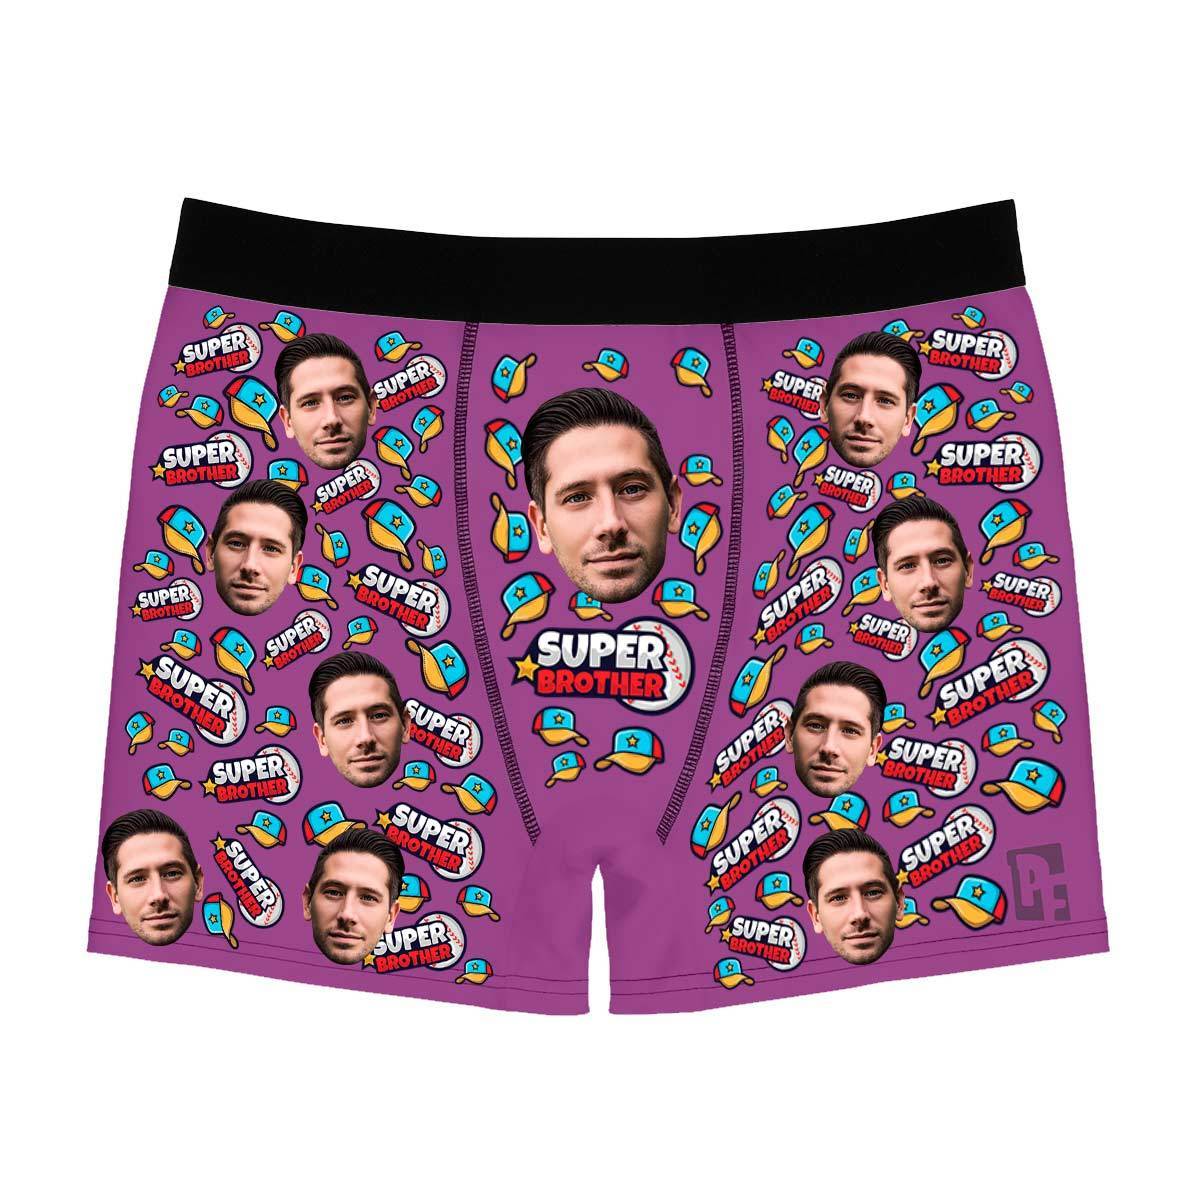 Purple Super Brother men's boxer briefs personalized with photo printed on them